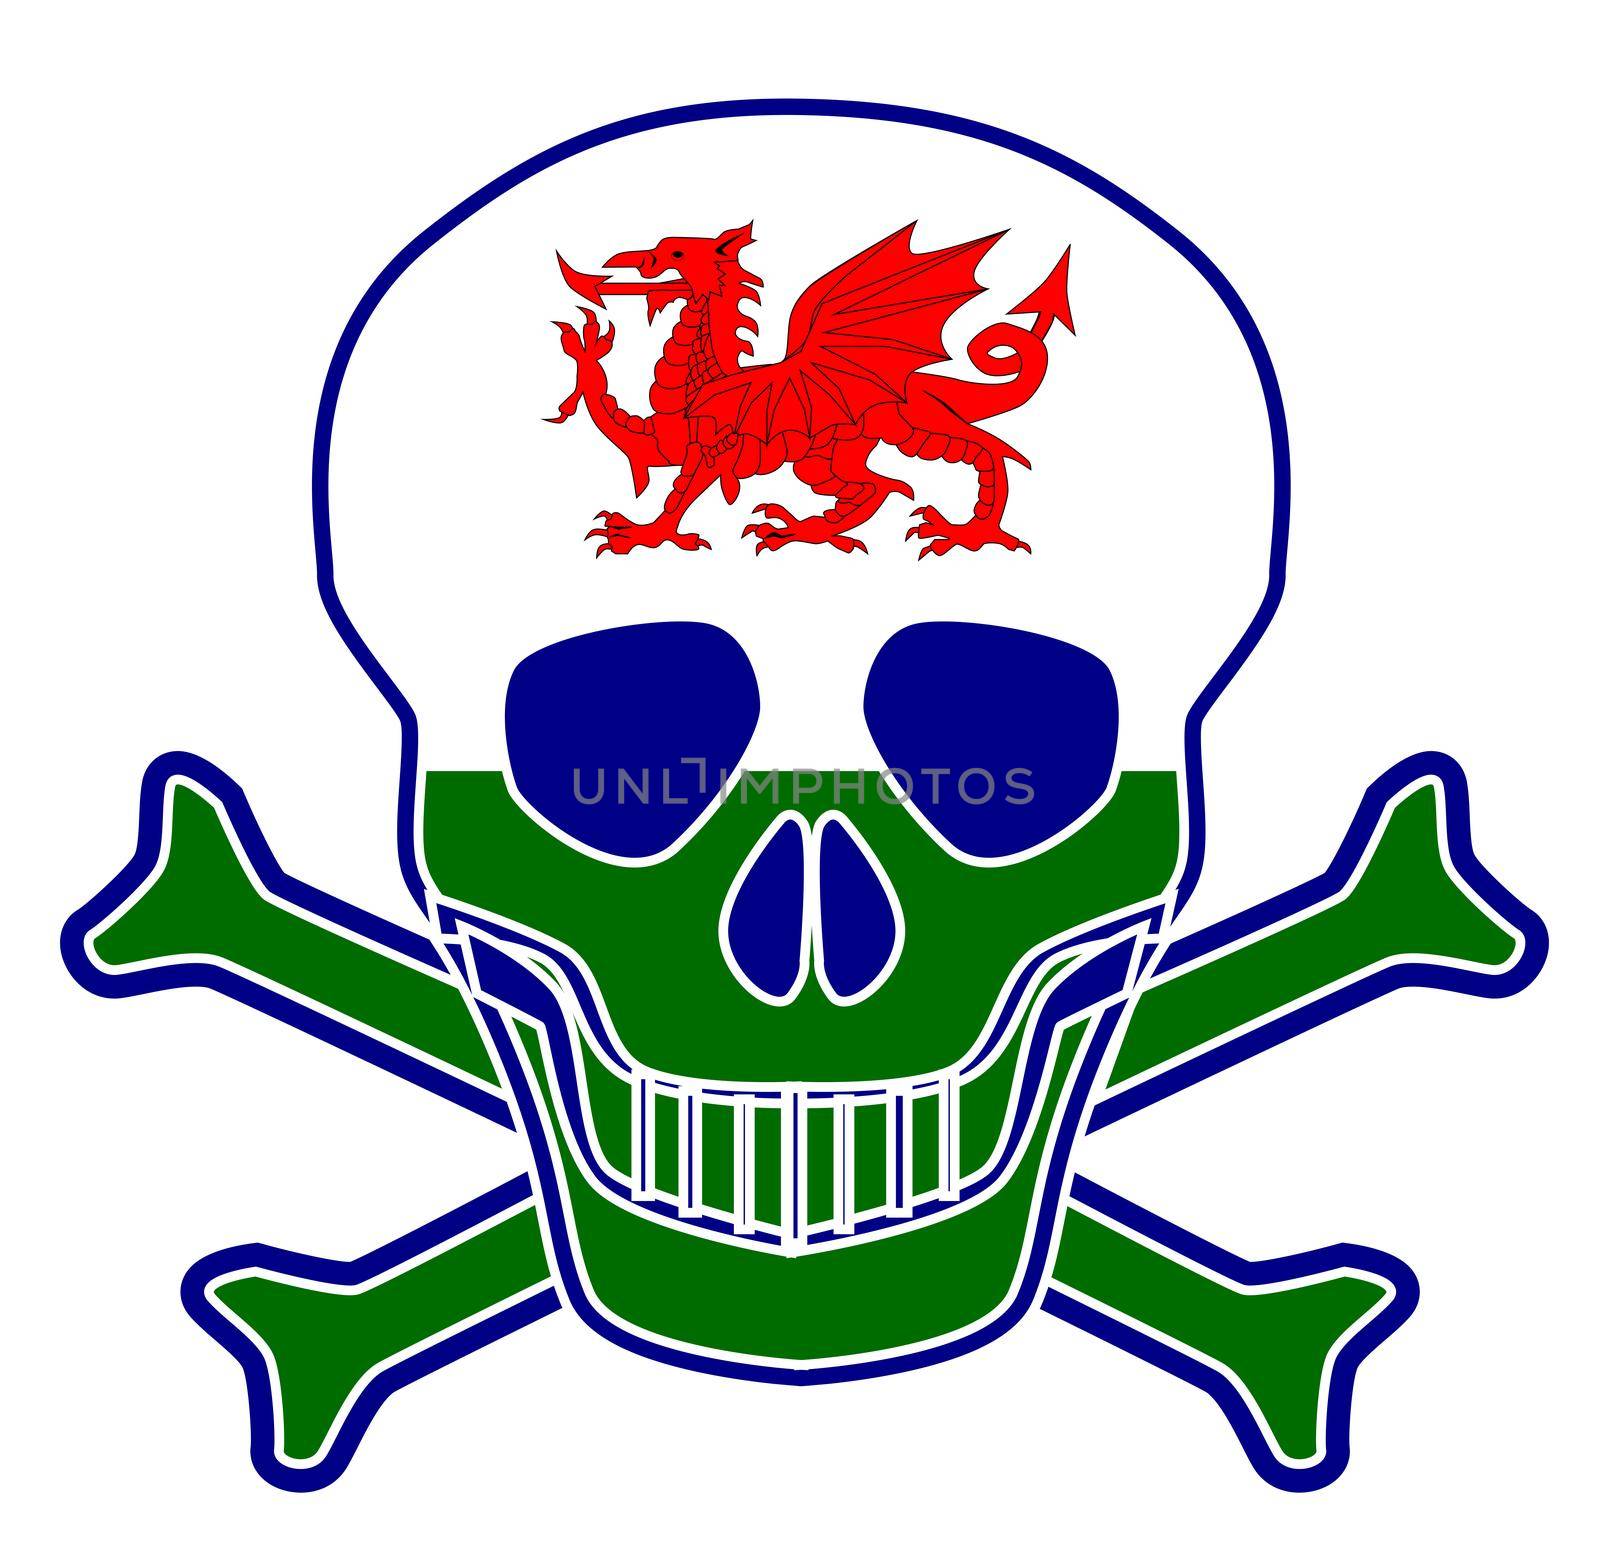 Skull and crossbones with the Welsh and red dragon flag sign over a white background